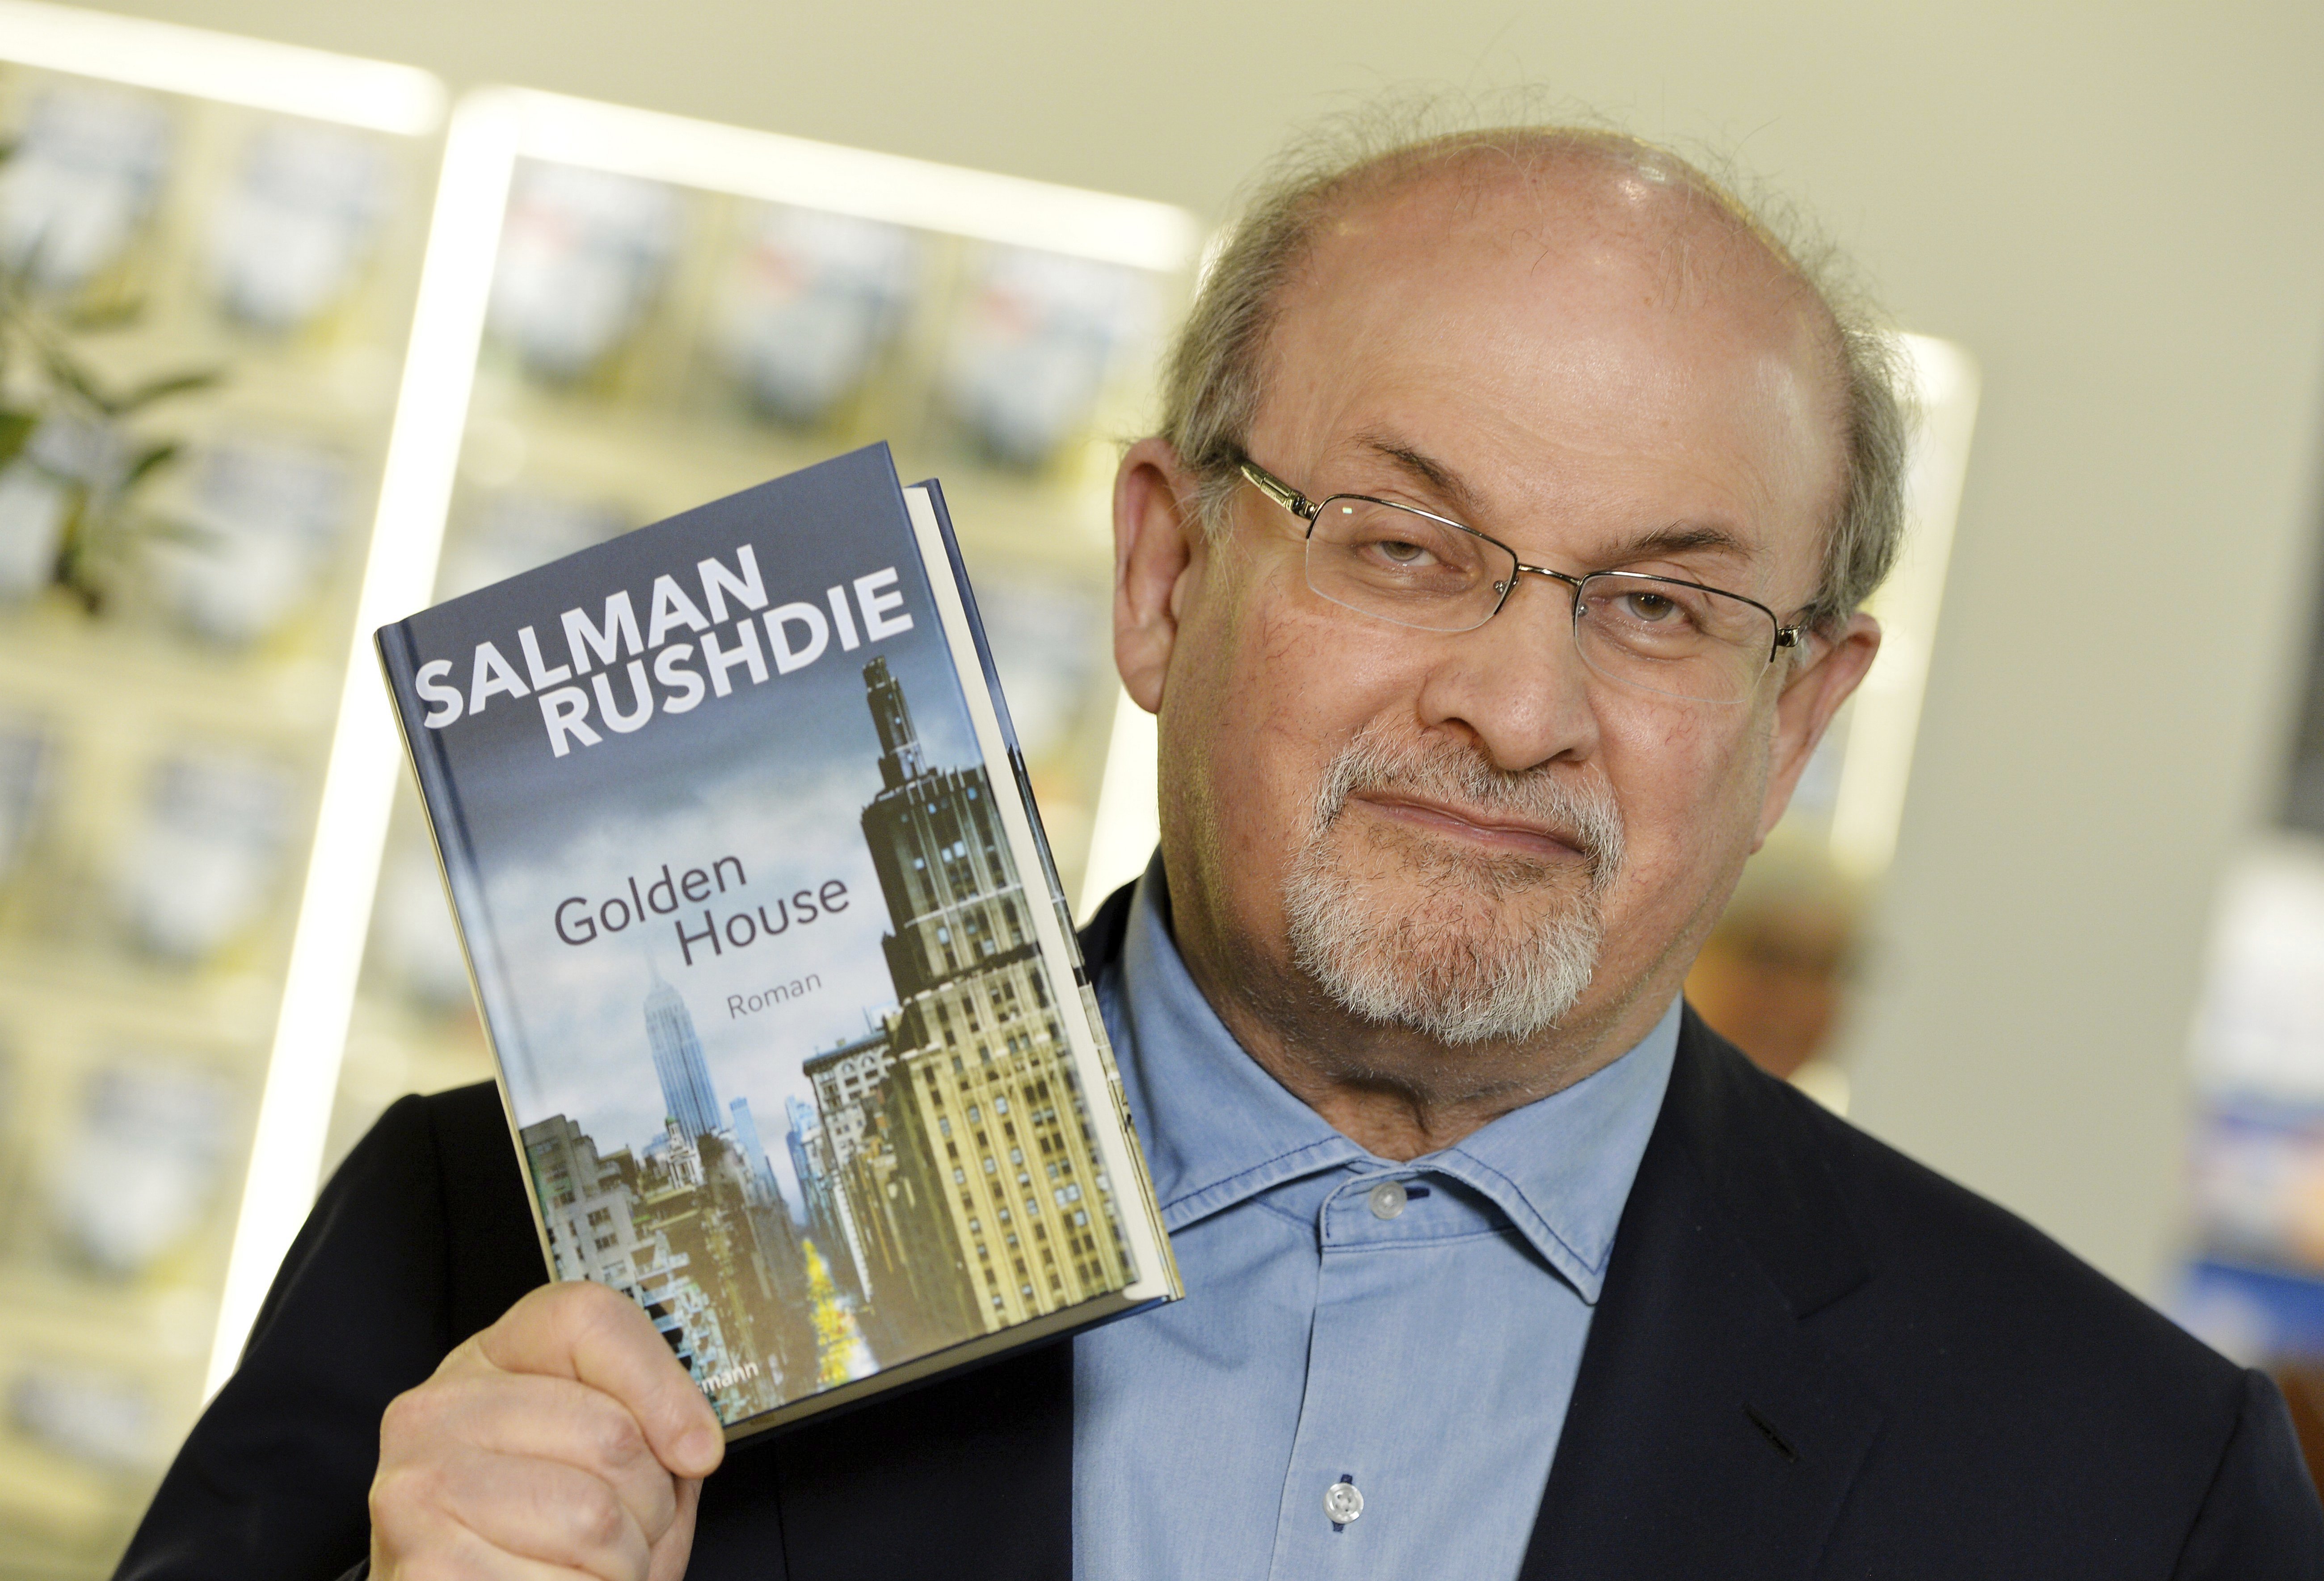 Author Salman Rushdie,shows a new book as he visits the book fair in Frankfurt, Germany, Thursday, Oct. 12, 2017.